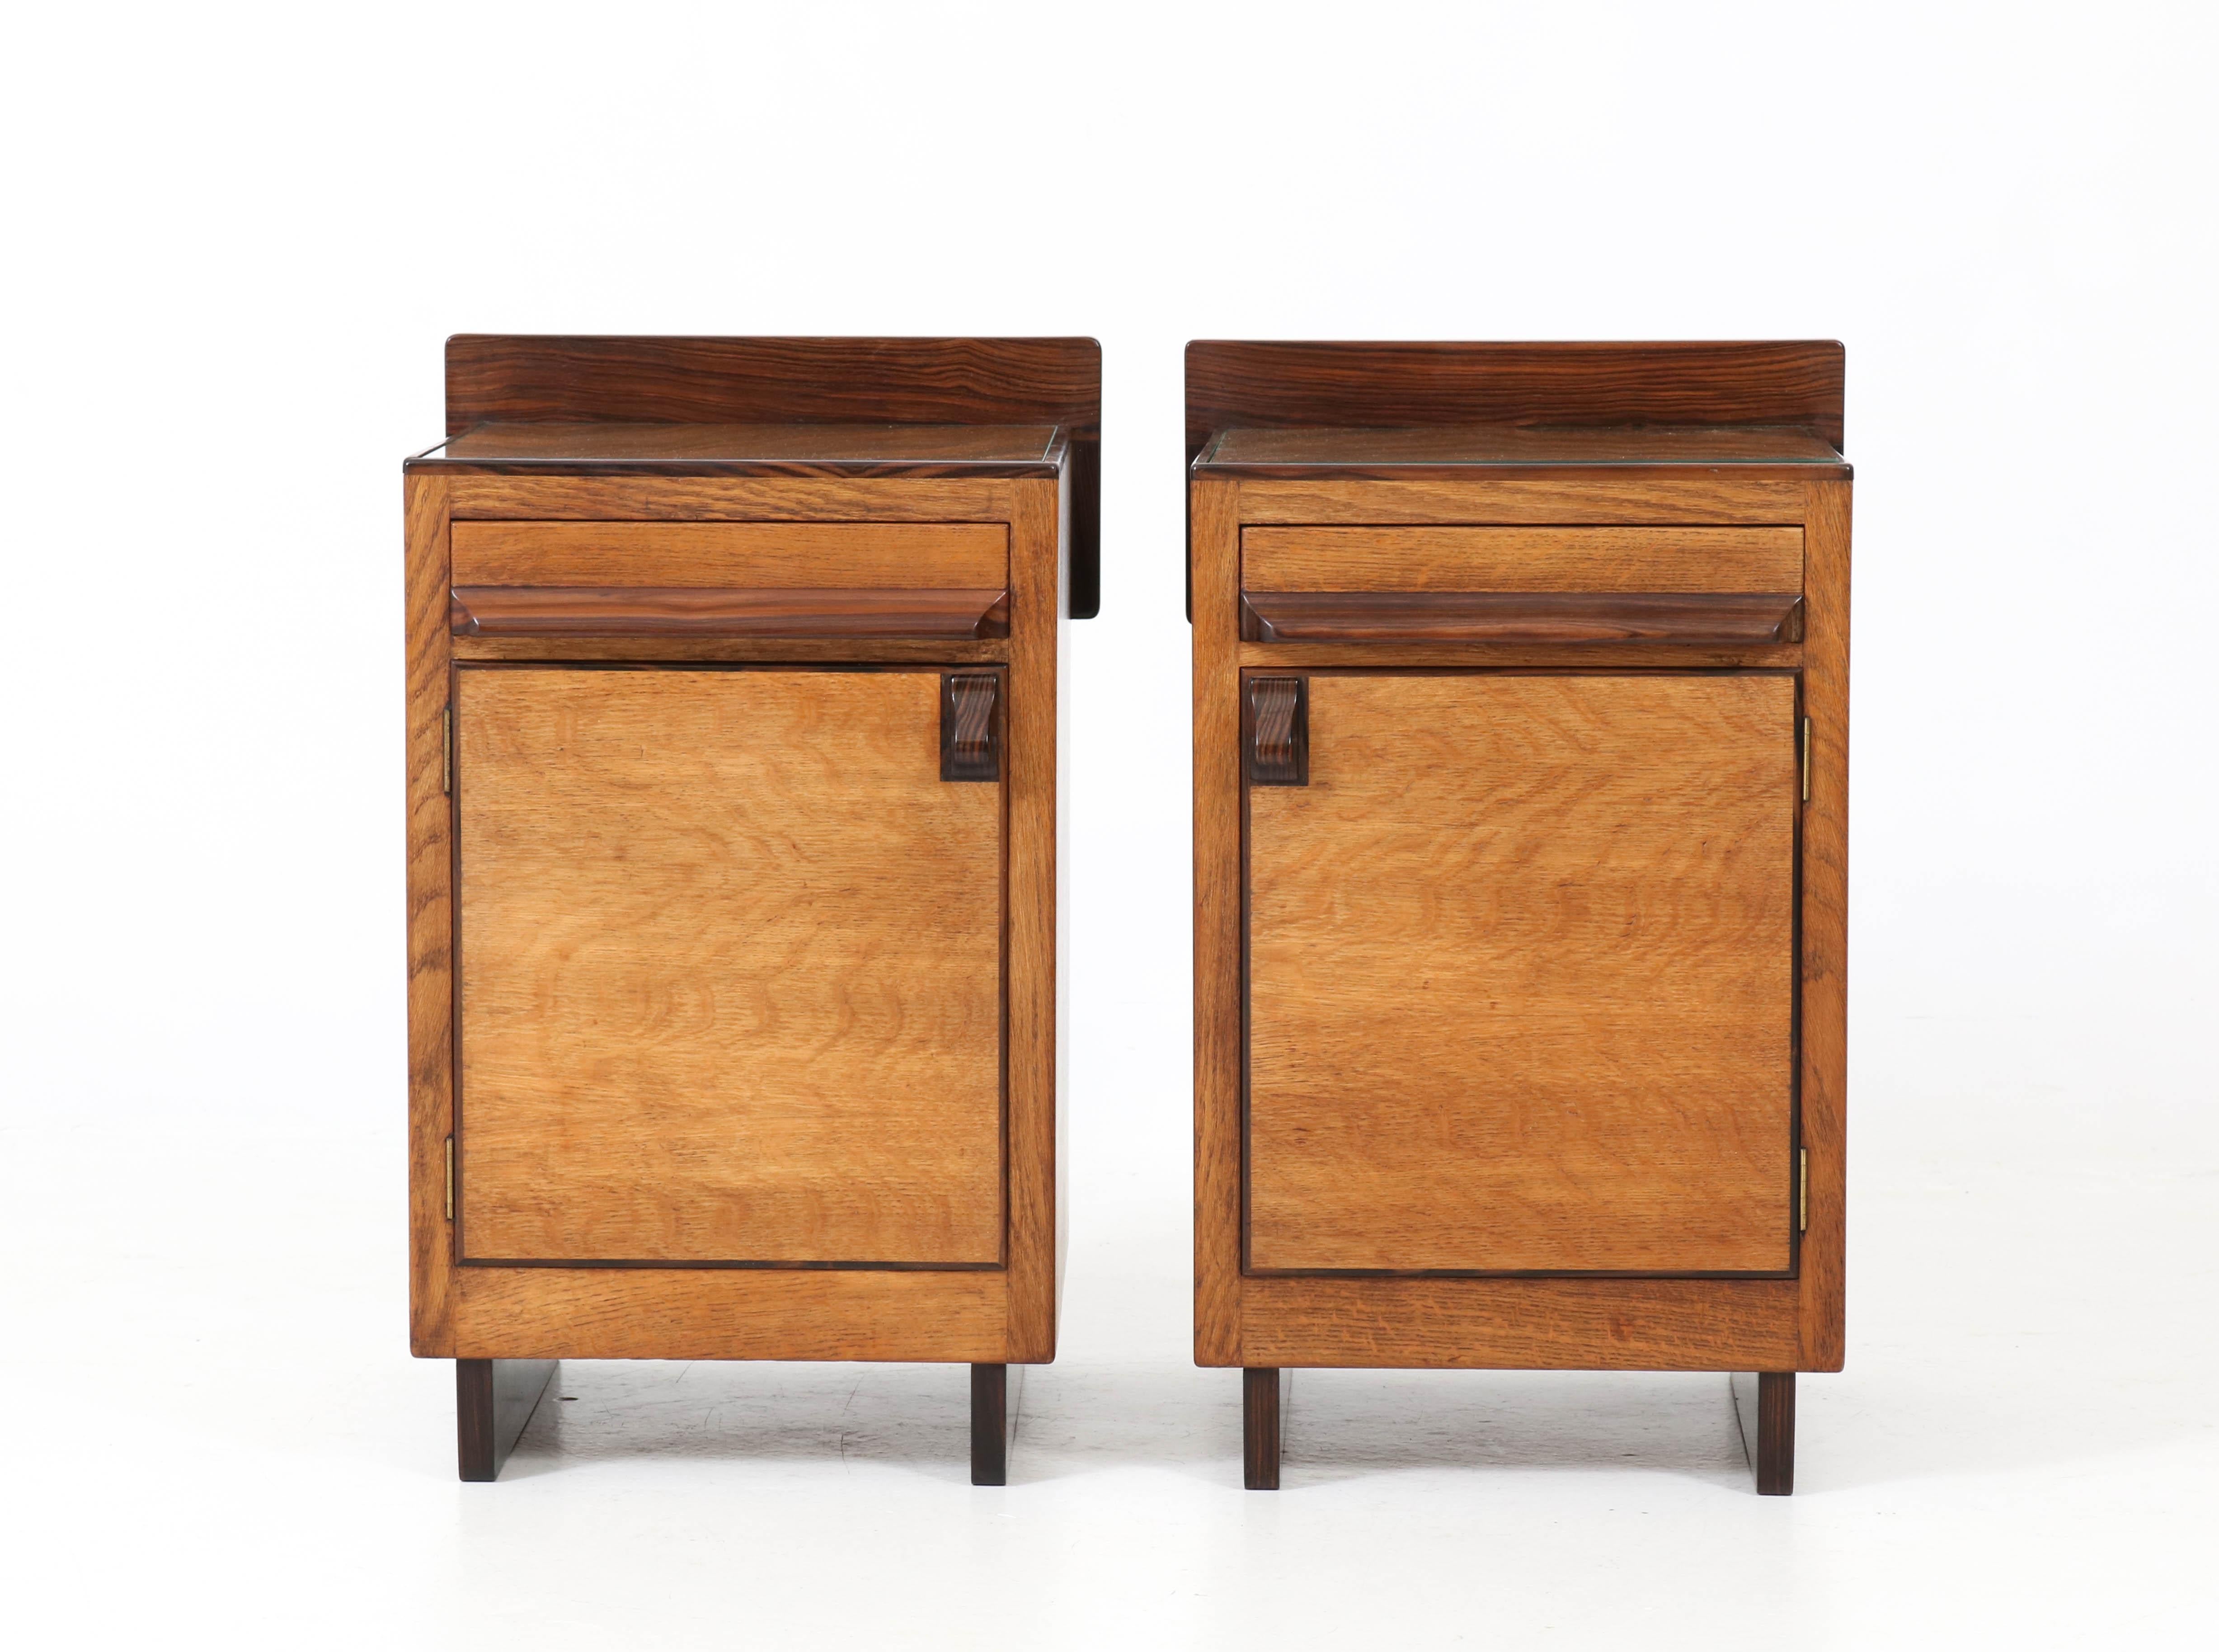 Stunning and rare Art Deco Haagse School nightstands or bedside tables.
Striking Dutch design in oak from the twenties.
Solid Macassar ebony handles on doors and drawers.
In good original condition with minor wear consistent with age and